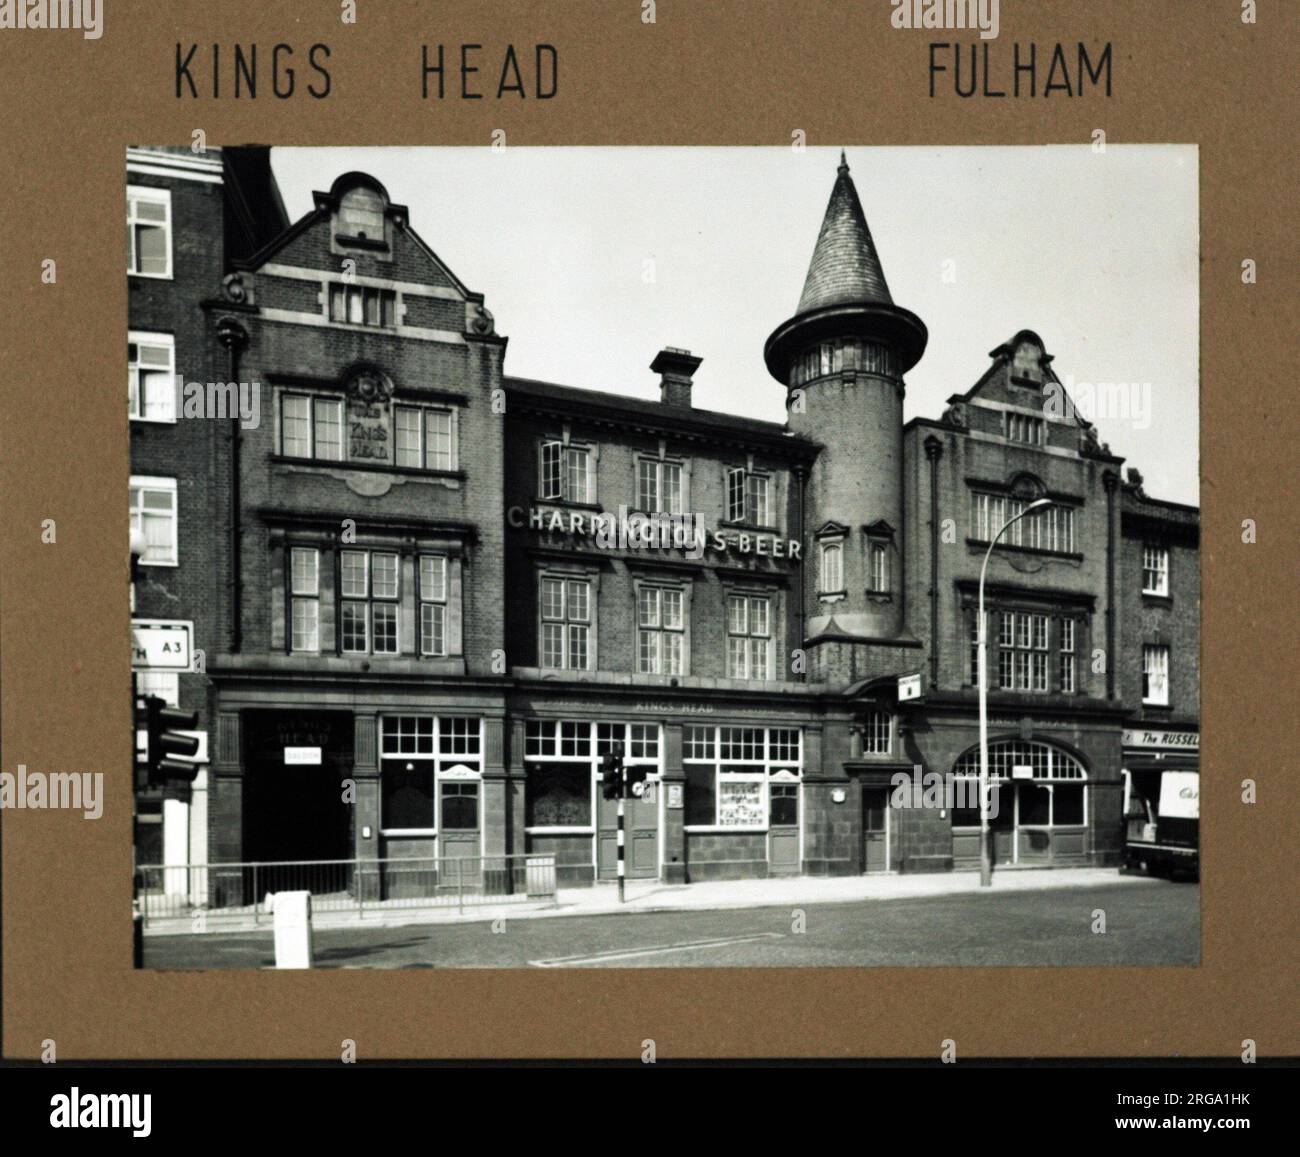 Photograph of Kings Head PH, Fulham, London. The main side of the print (shown here) depicts: Left Face on view of the pub.  The back of the print (available on request) details: Nothing for the Kings Head, Fulham, London SW6 3LQ. As of July 2018 . Currently closed and the planning consent requested means the future of this venue as a pub or bar must be regarded as uncertain. Stock Photo